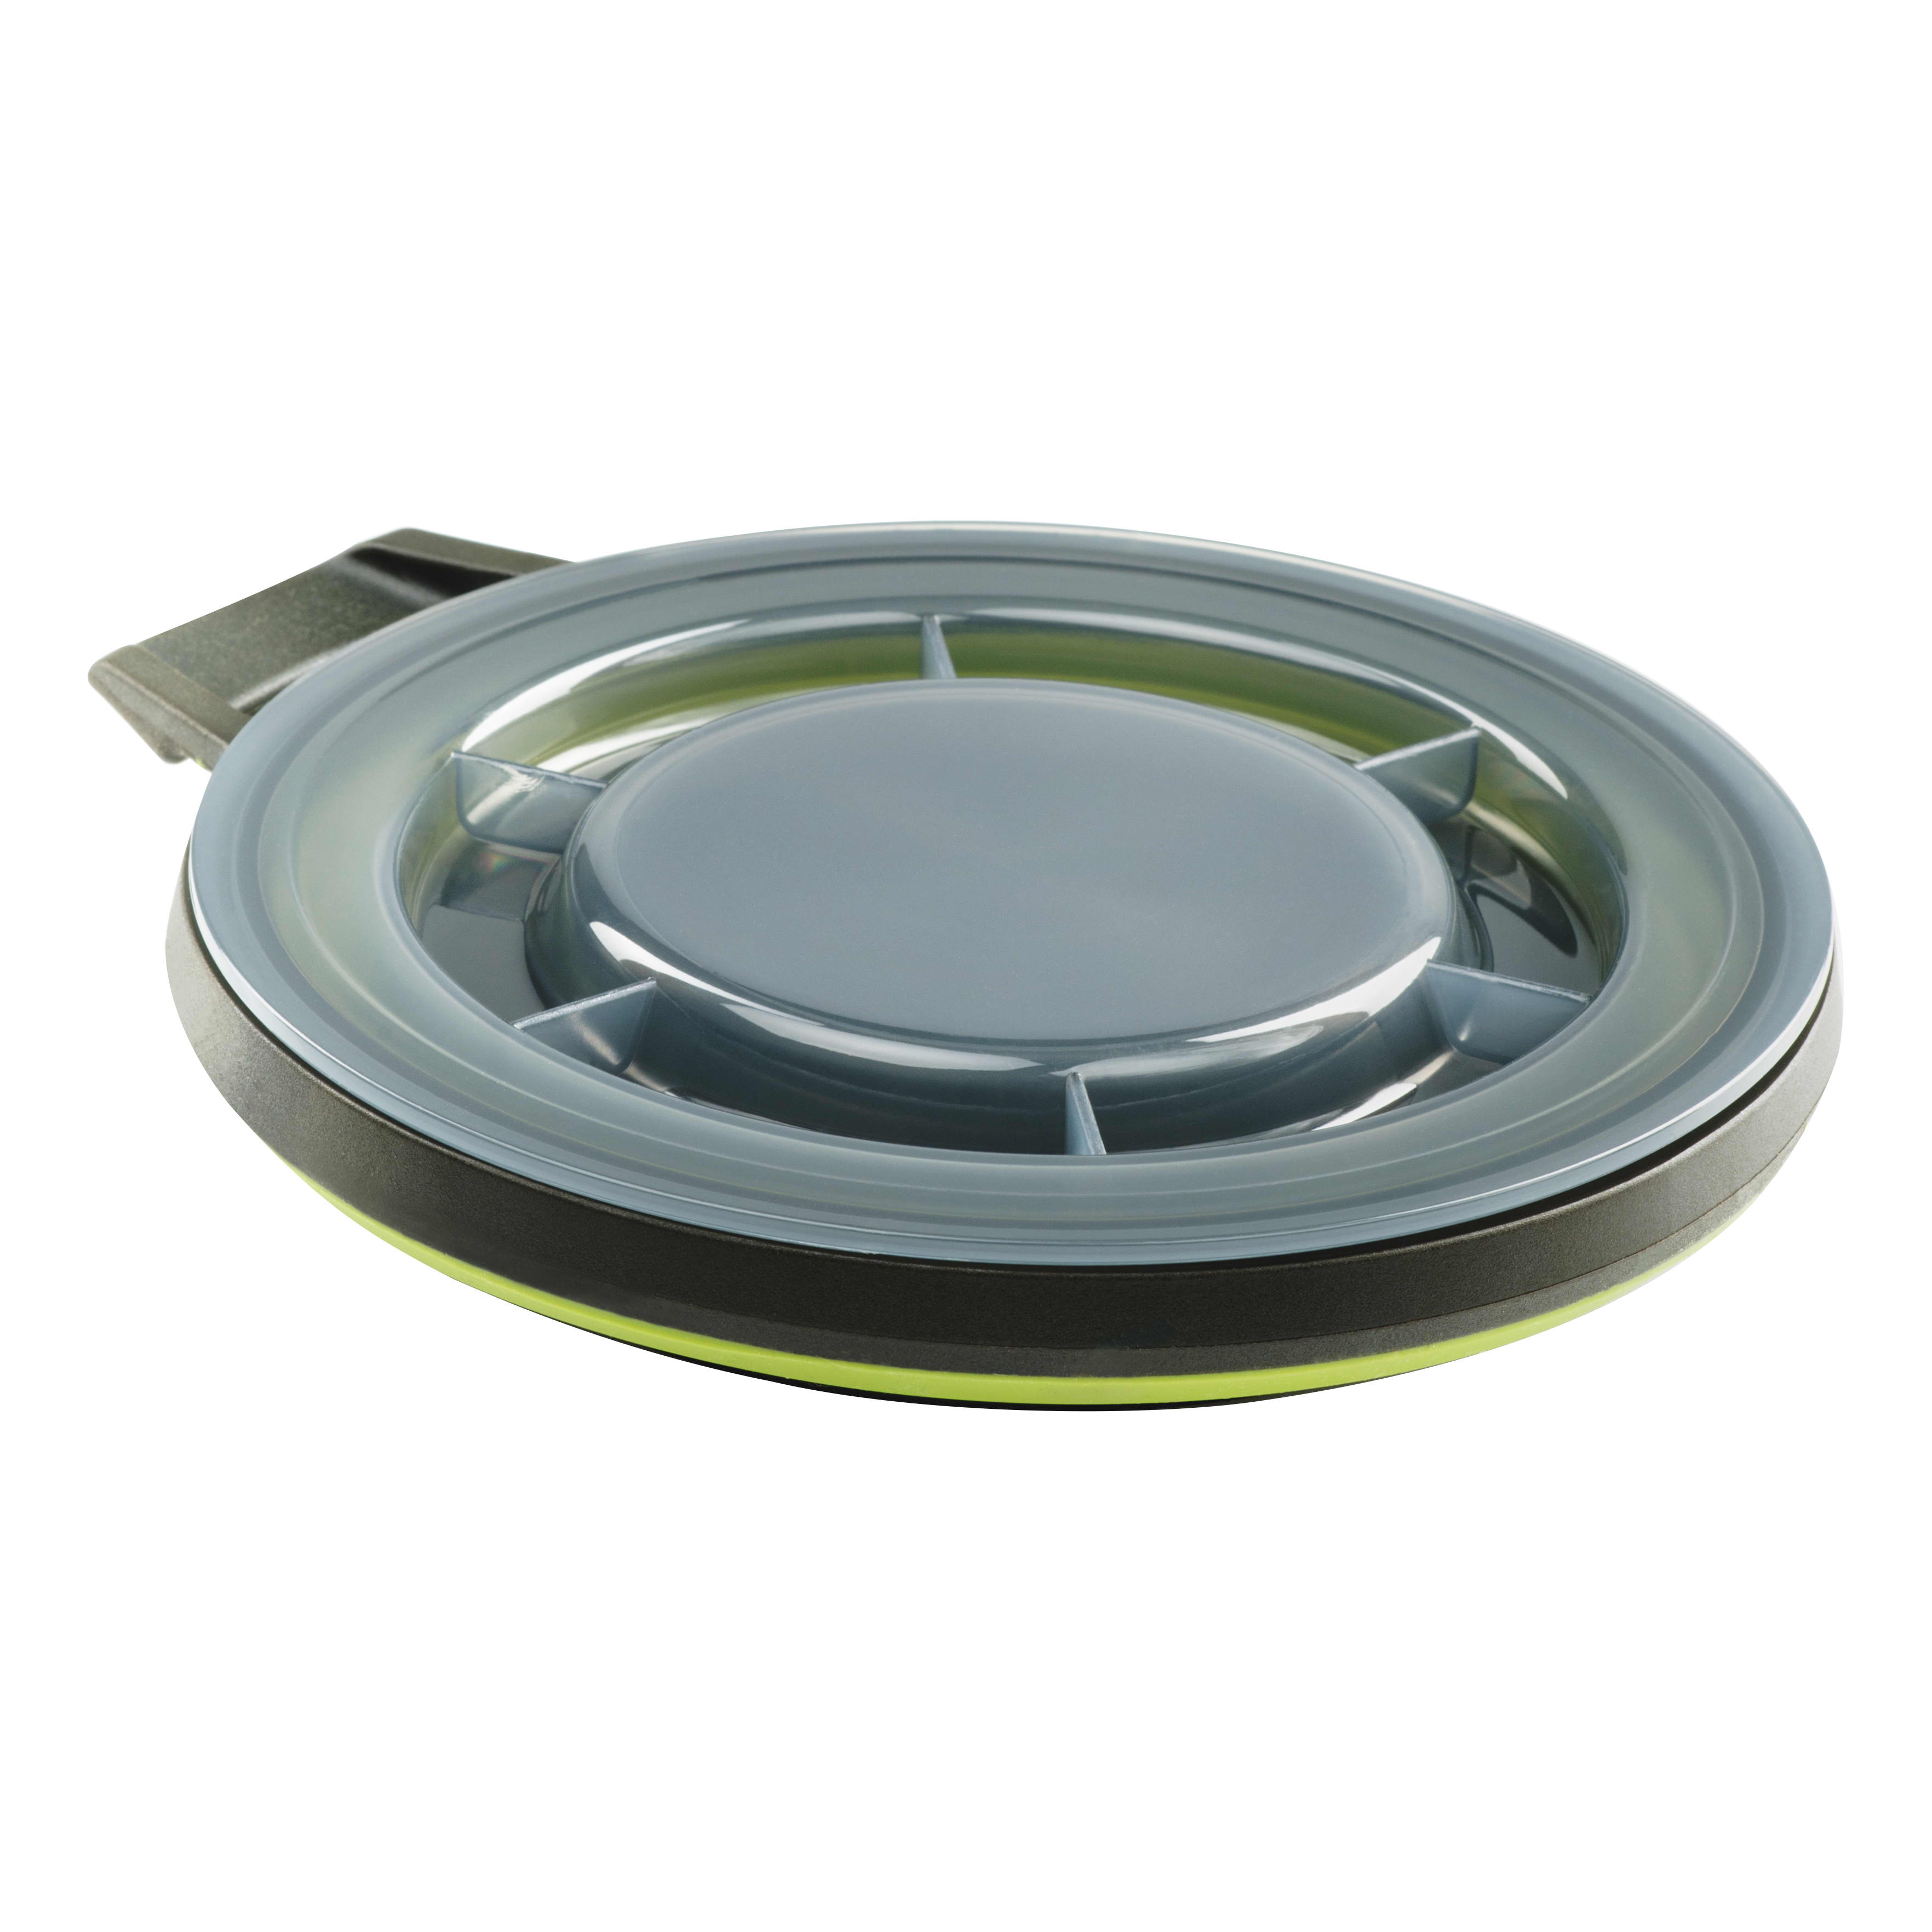 GSI Outdoors Escape Bowl with Lid - Green - Compressed View